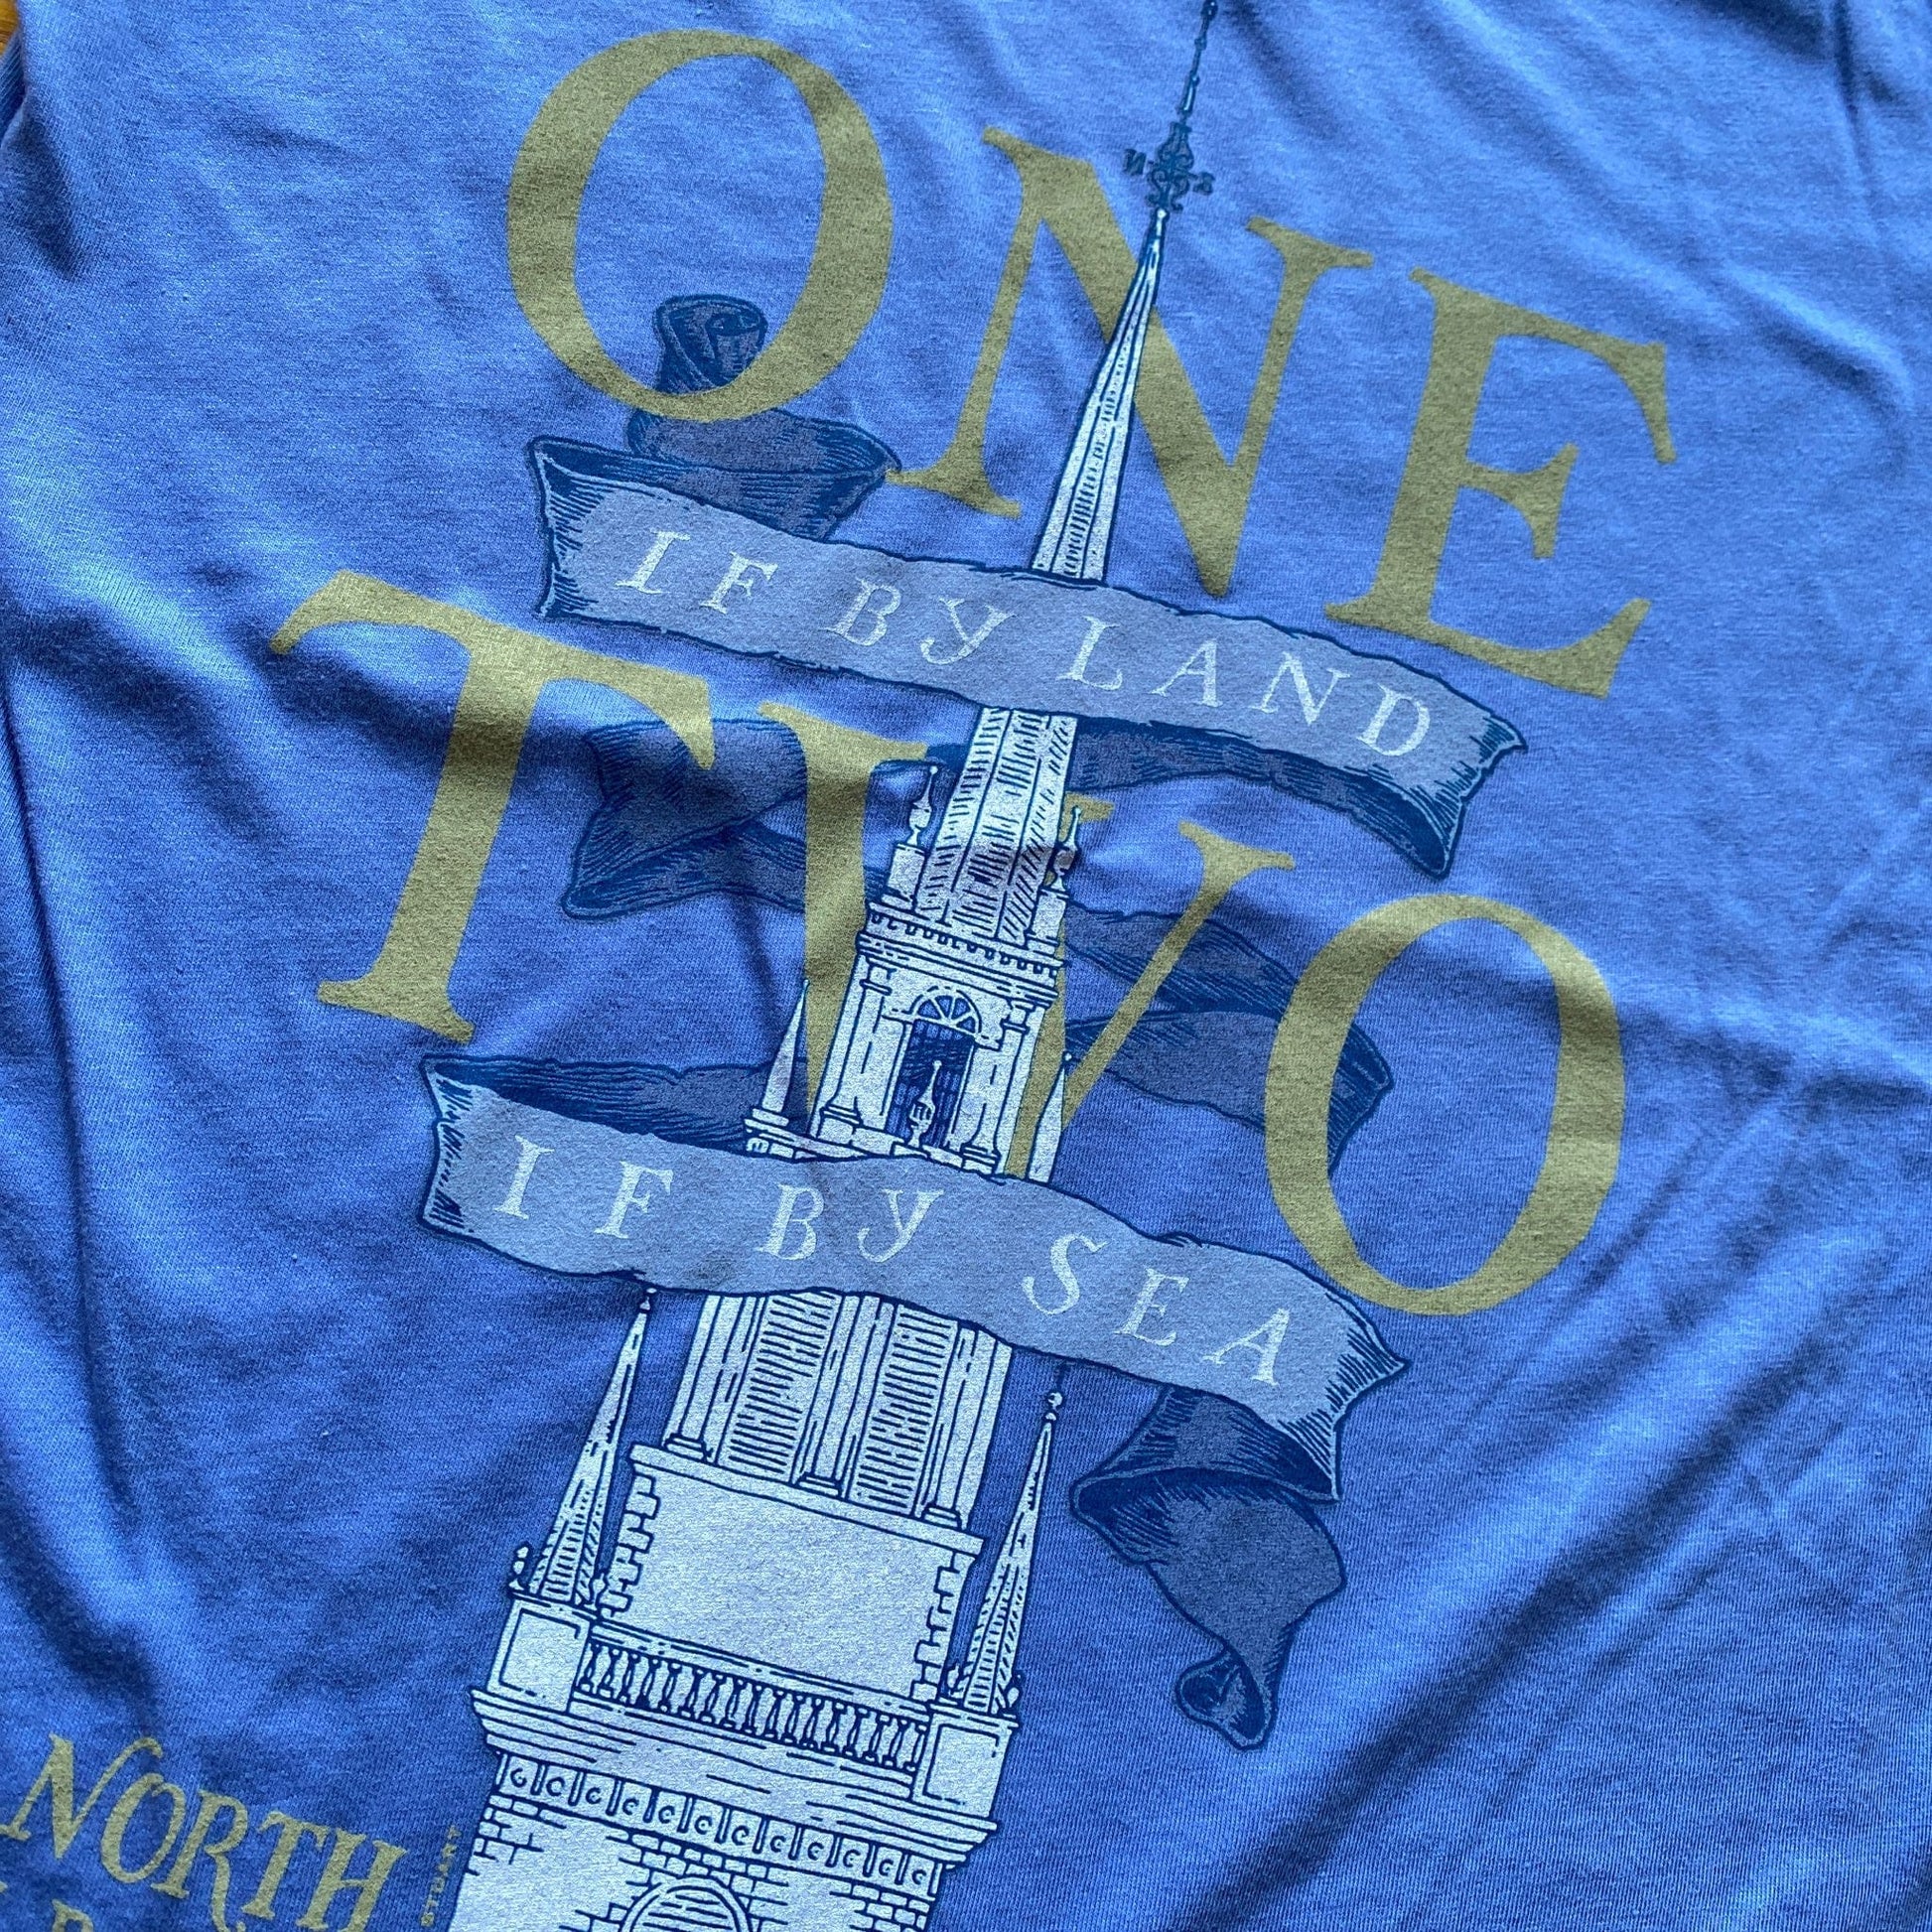 Close-up of Blue Violet "One if by land . . ." Old North Special Edition Women's v-neck shirt from the history list store